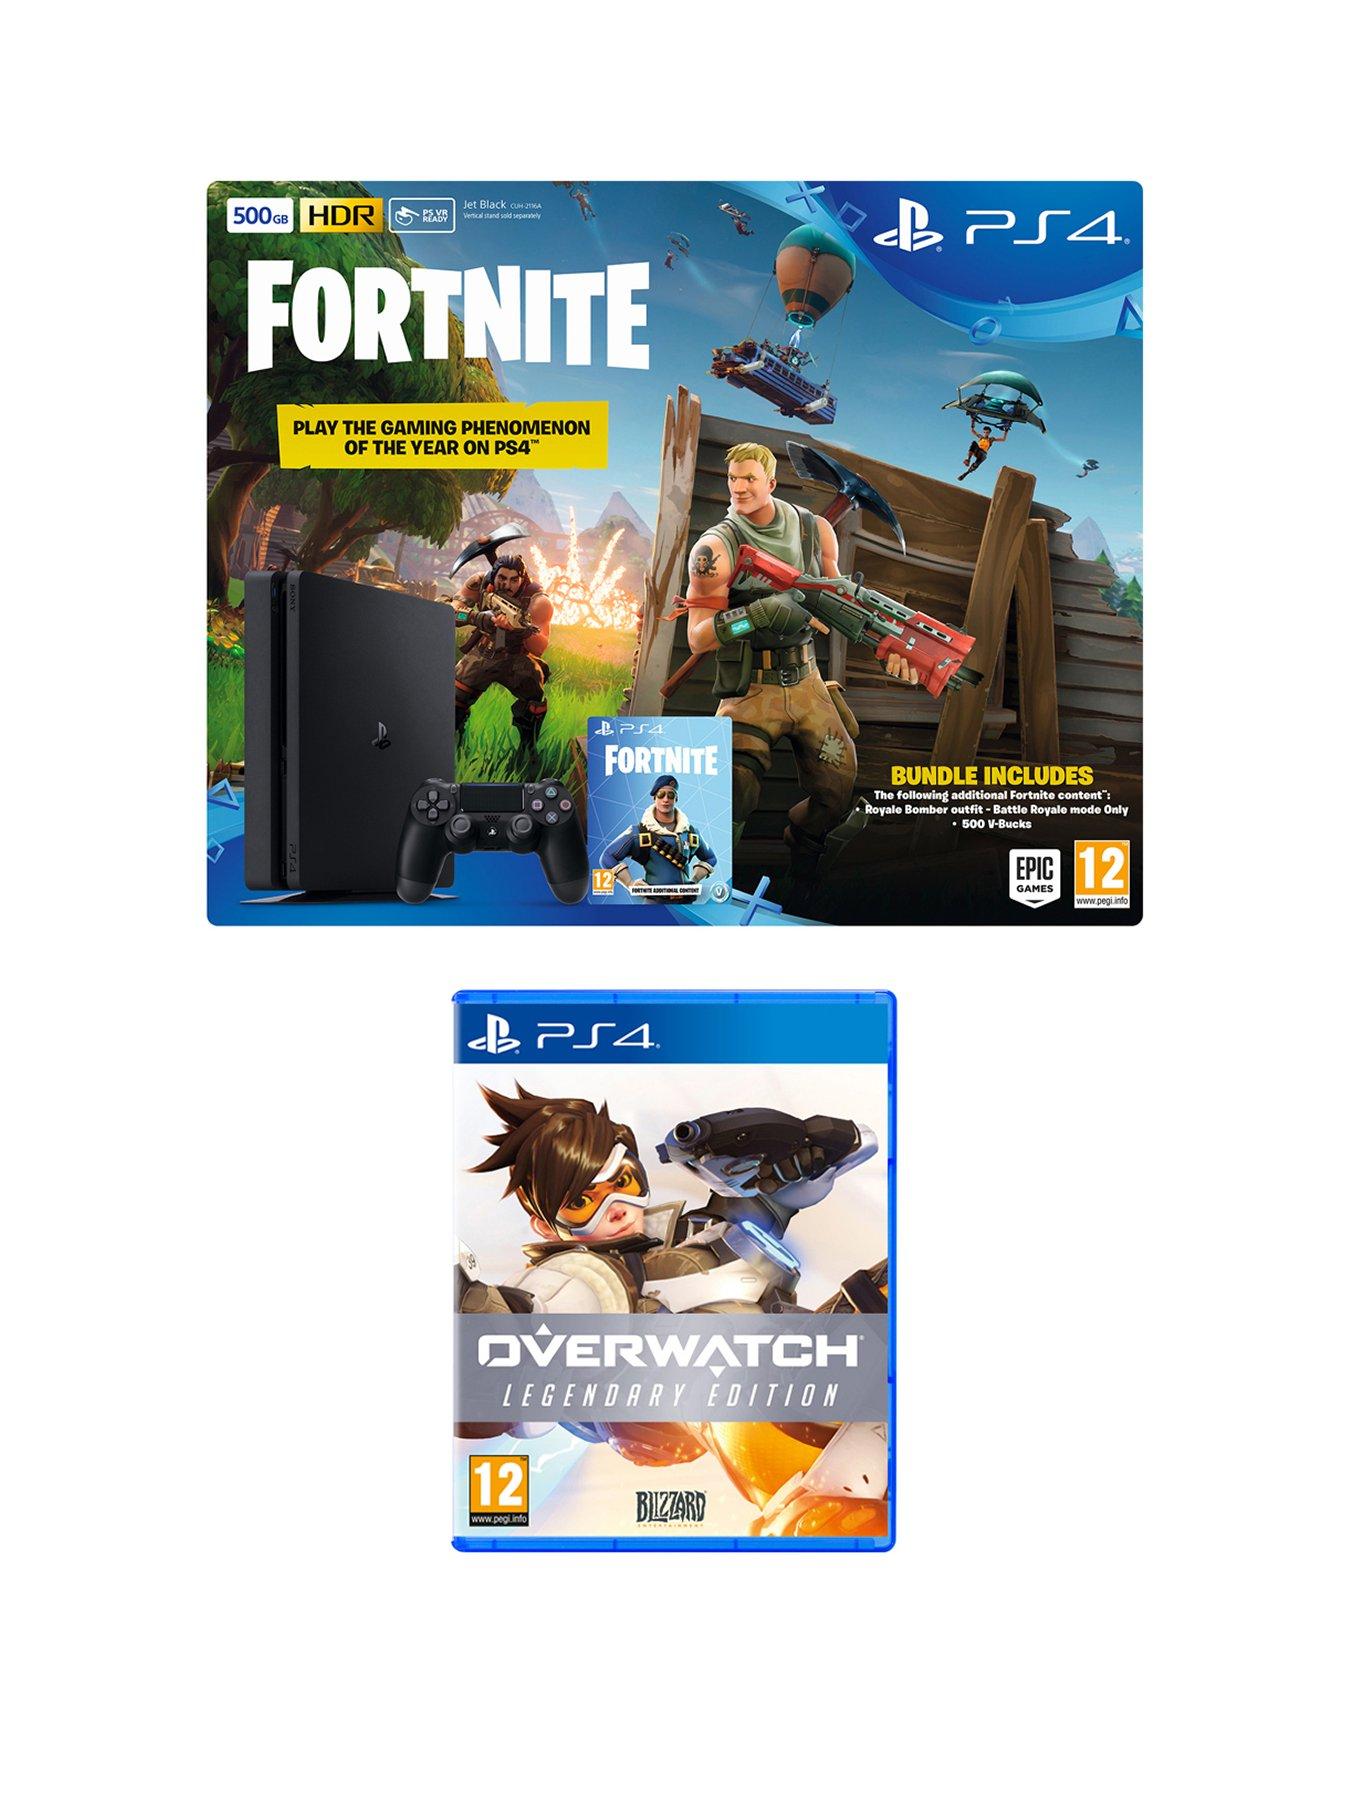 playstation 4 fortnite ps4 500gb bundle with overwatch legendary edition plus optional extras - ps4 500gb fortnite